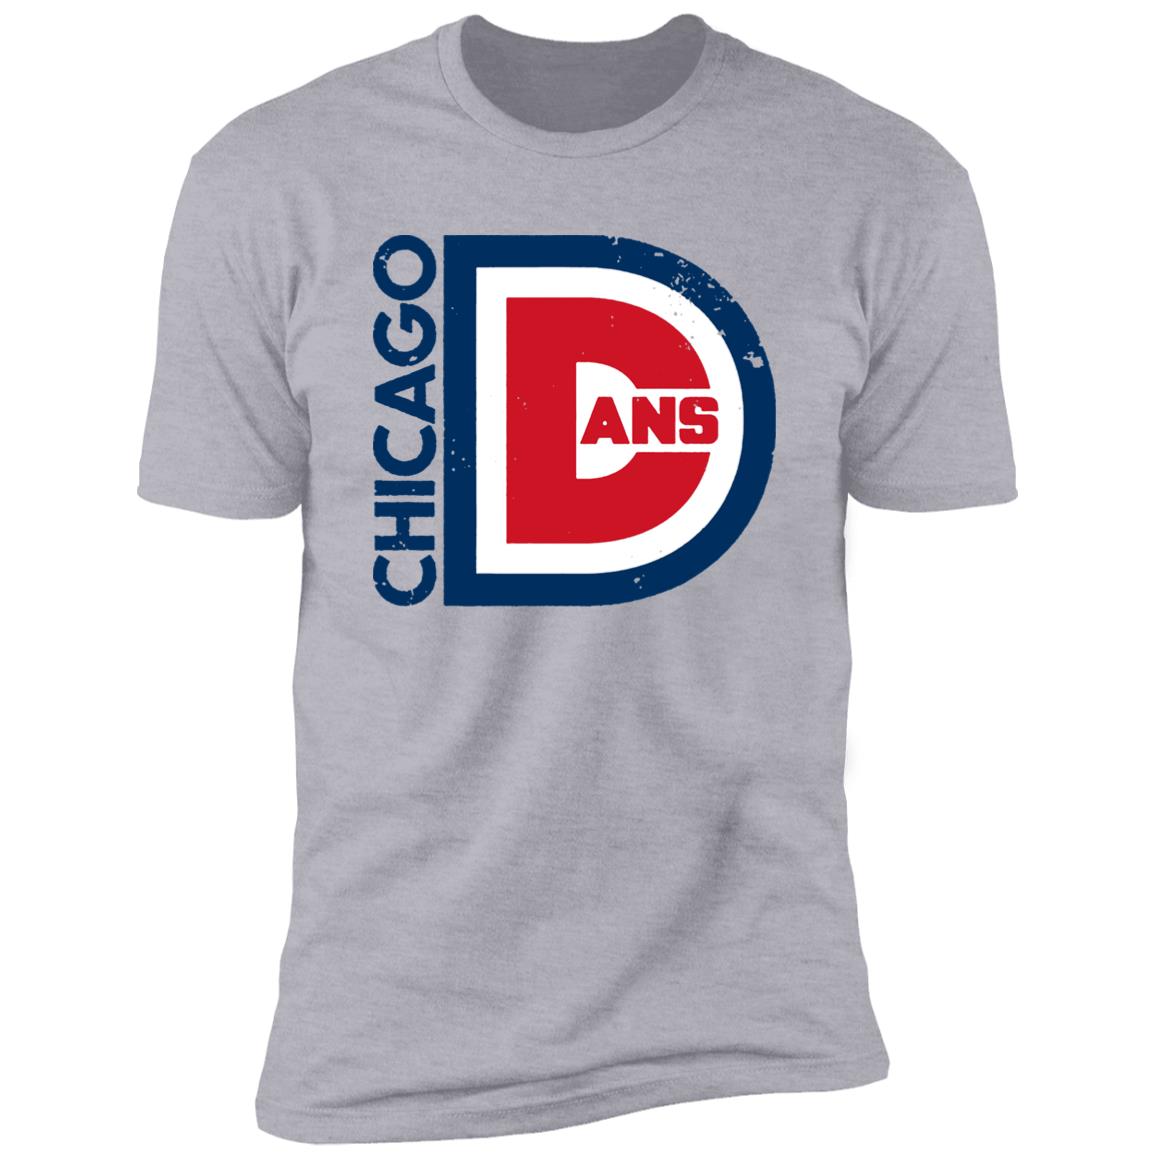 Dansby Swanson Chicago Cubs Go Chi shirt t-shirt by To-Tee